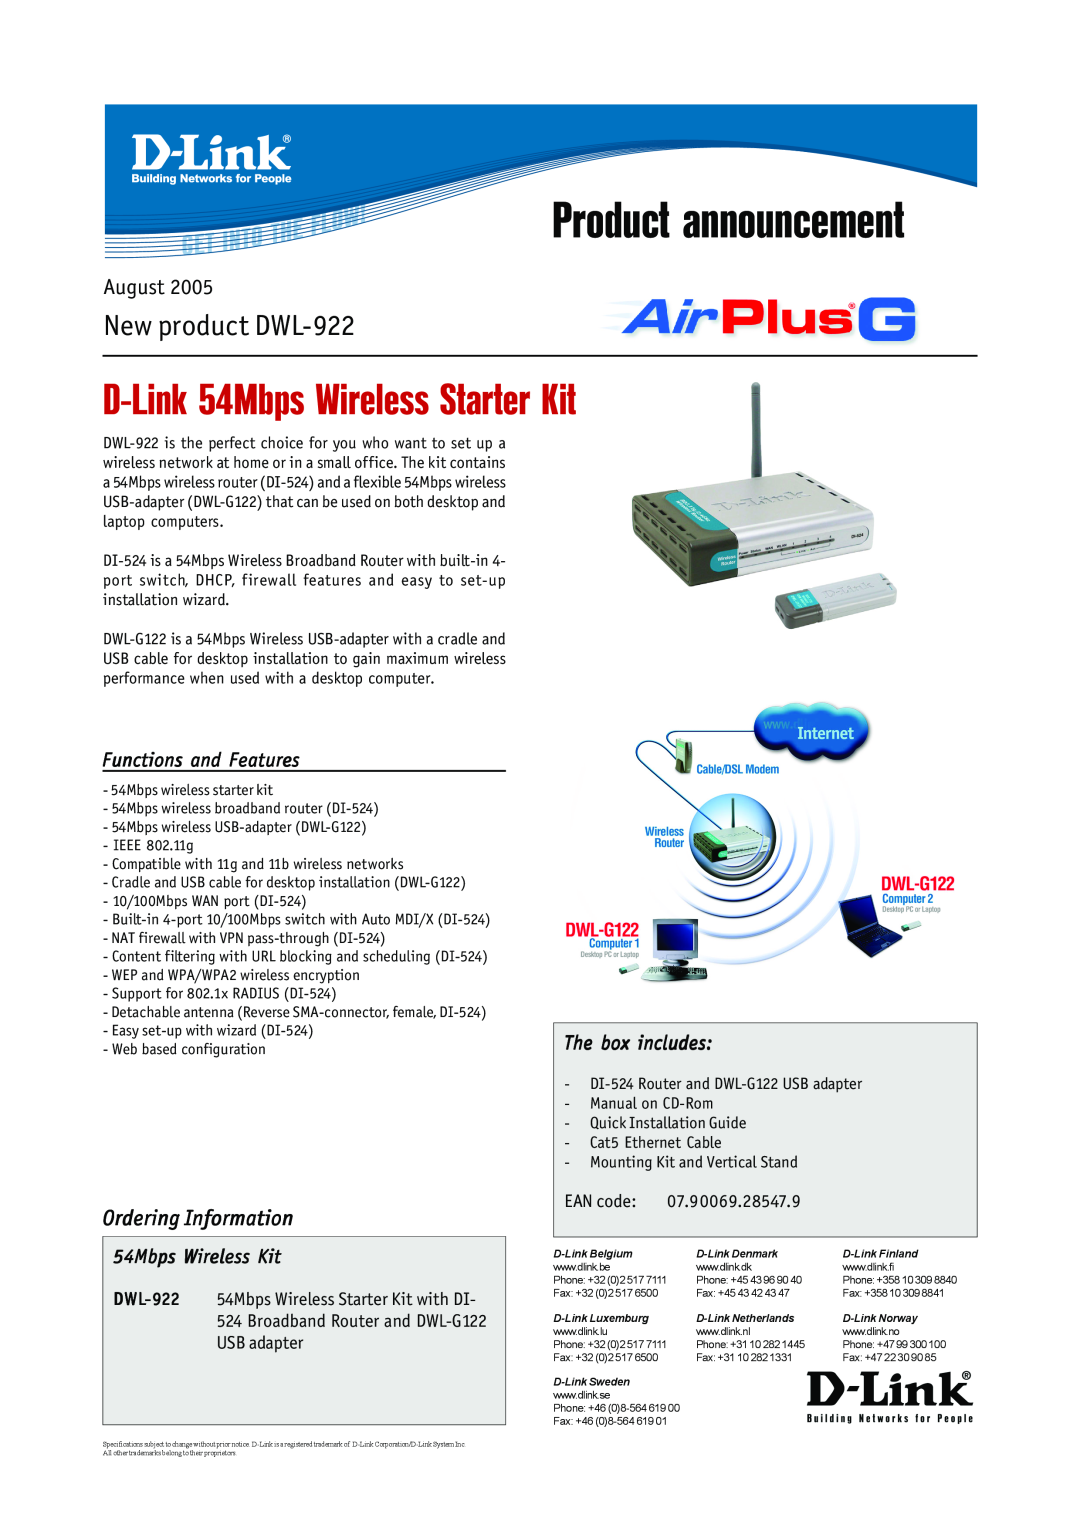 D-Link specifications Product announcement, D-Link 54Mbps Wireless Starter Kit, New product DWL-922, August, EAN code 